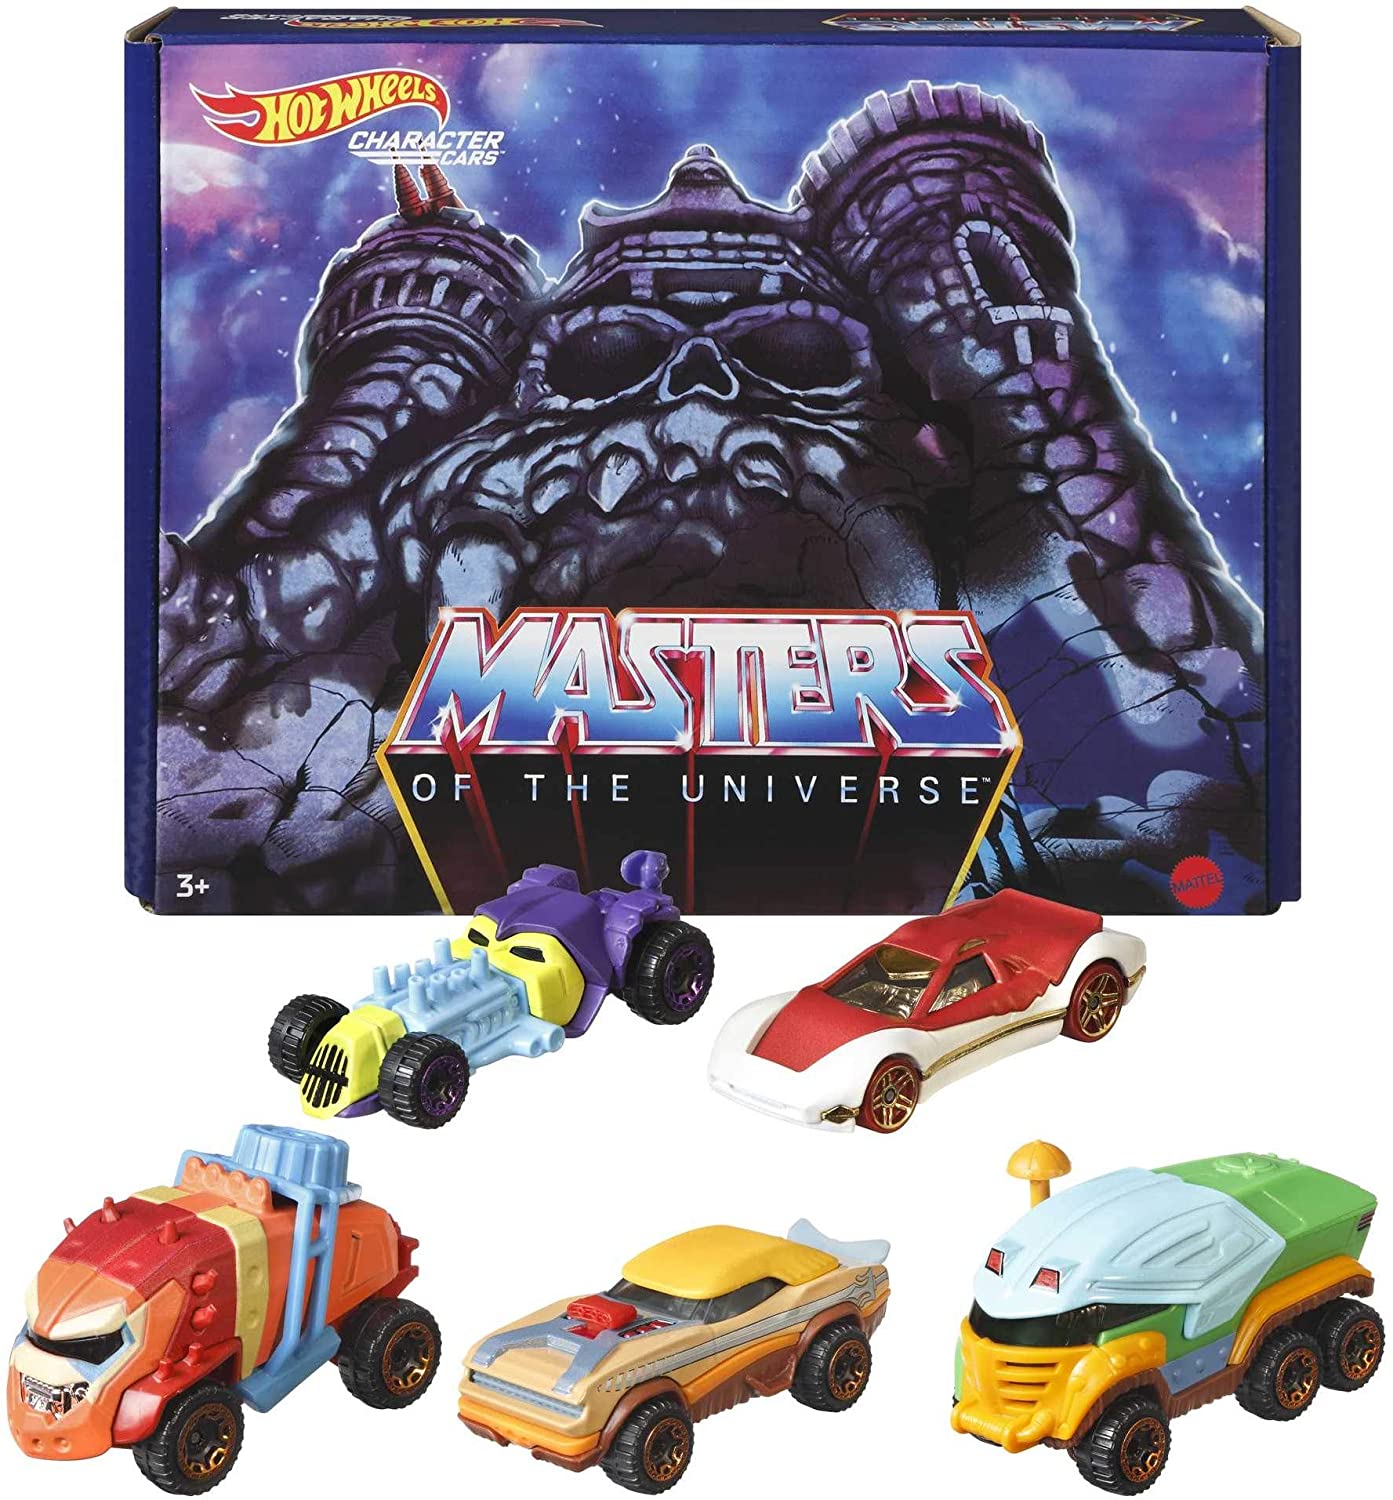 5-Pack Hot Wheels: Masters of the Universe Character Cars (1:64 Scale) $8.59 via Amazon